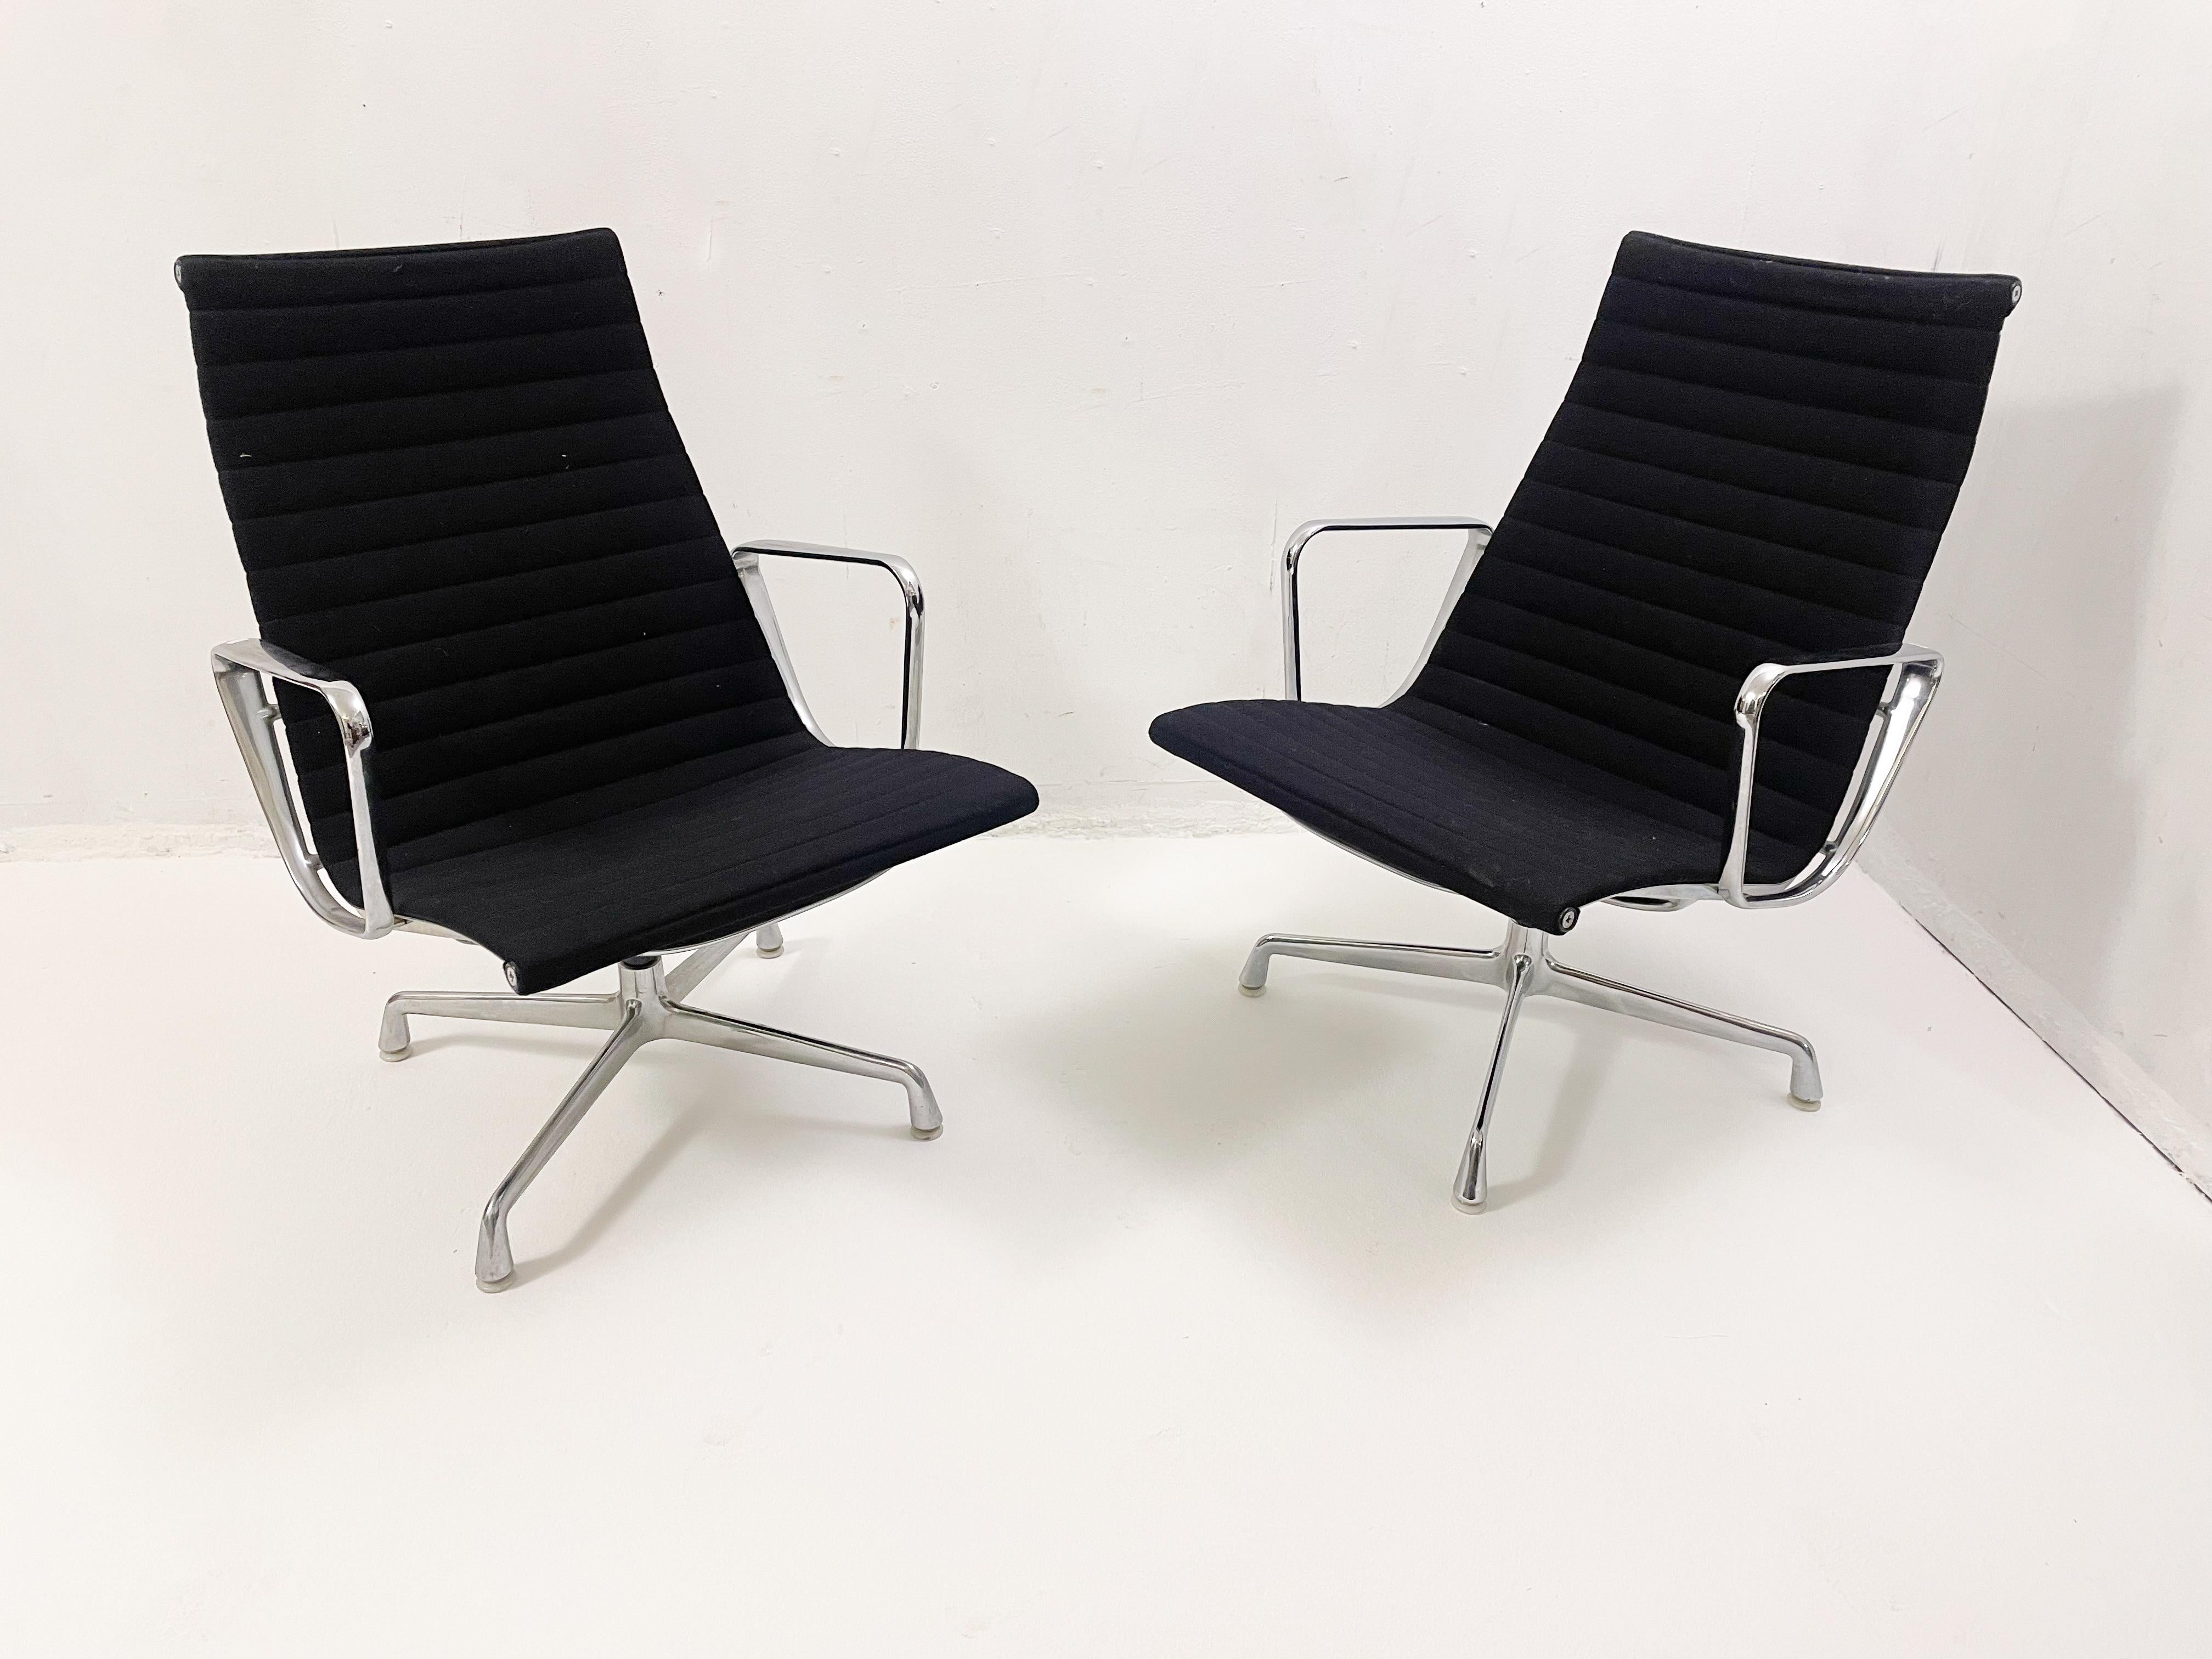 Metal Eames Desk Chair EA 117 by Herman Miller, 1990s - 3 Available For Sale